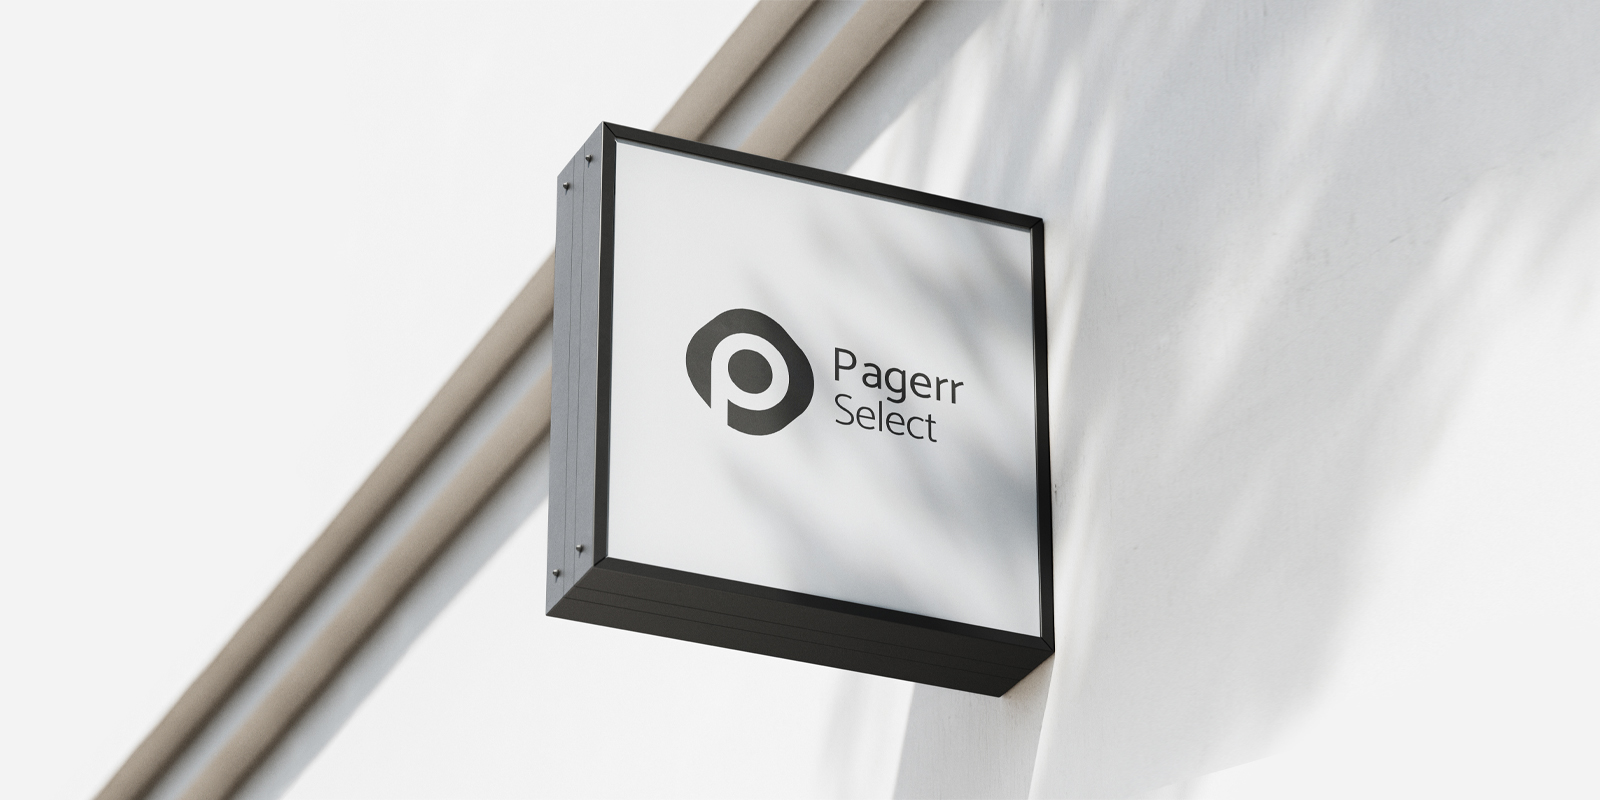 Essential signs in Melbourne - Print with Pagerr